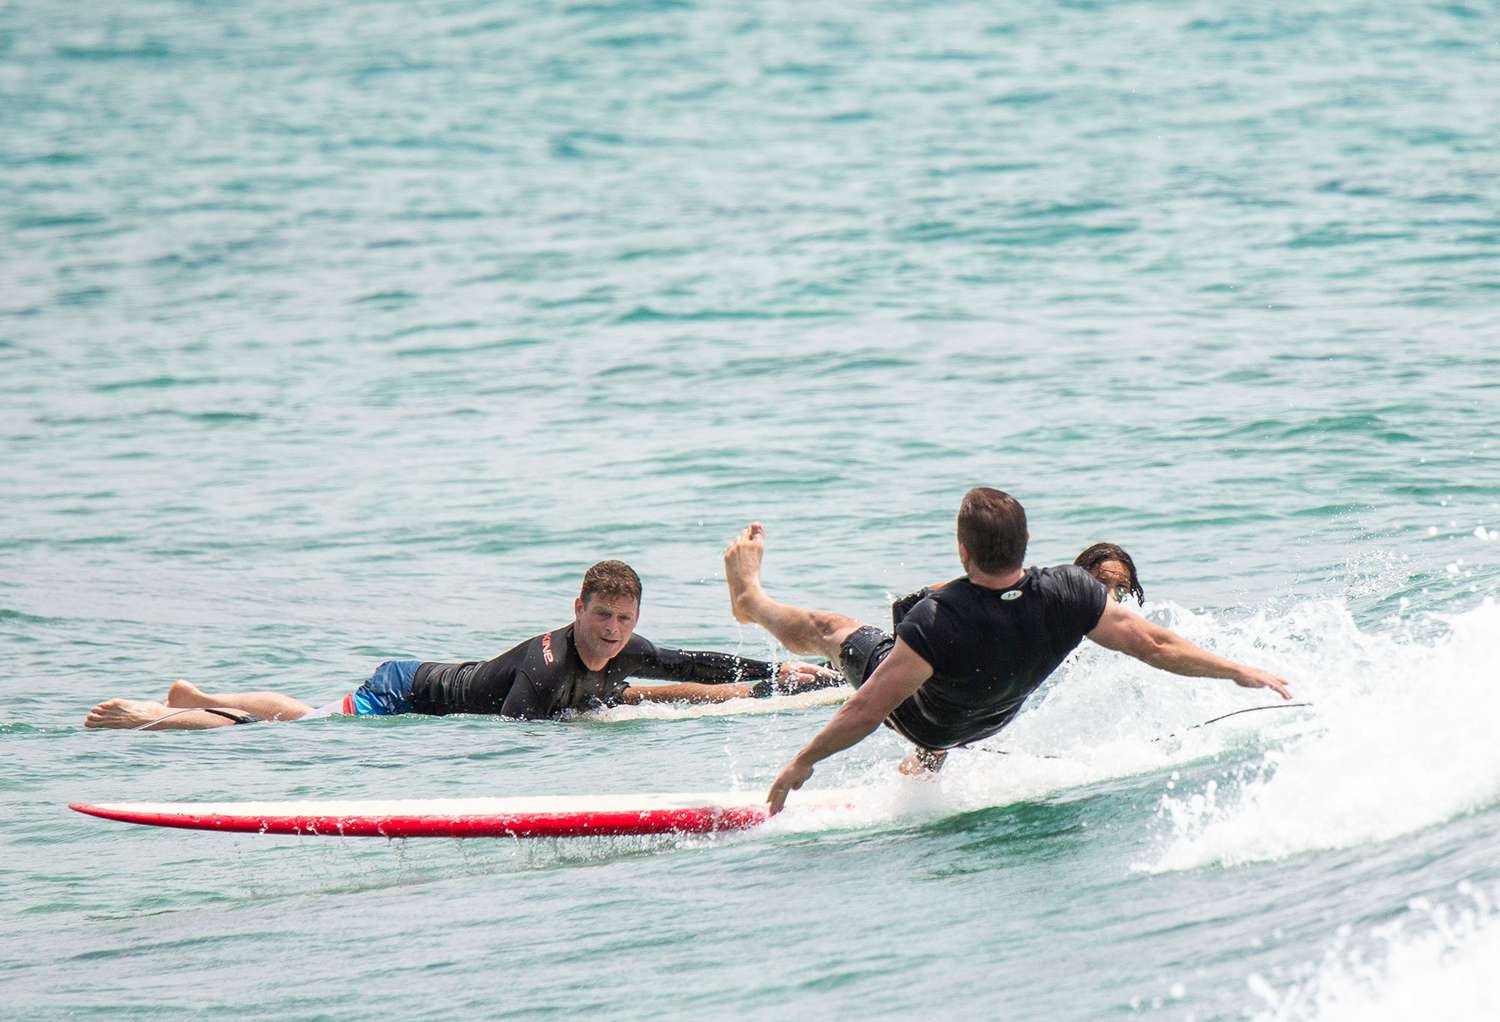 EXCLUSIVE: *NO MAIL ONLINE*GOOD WILL WIPEOUT! Matt Damon Gets Dumped During A Byron Bay Surfing Session